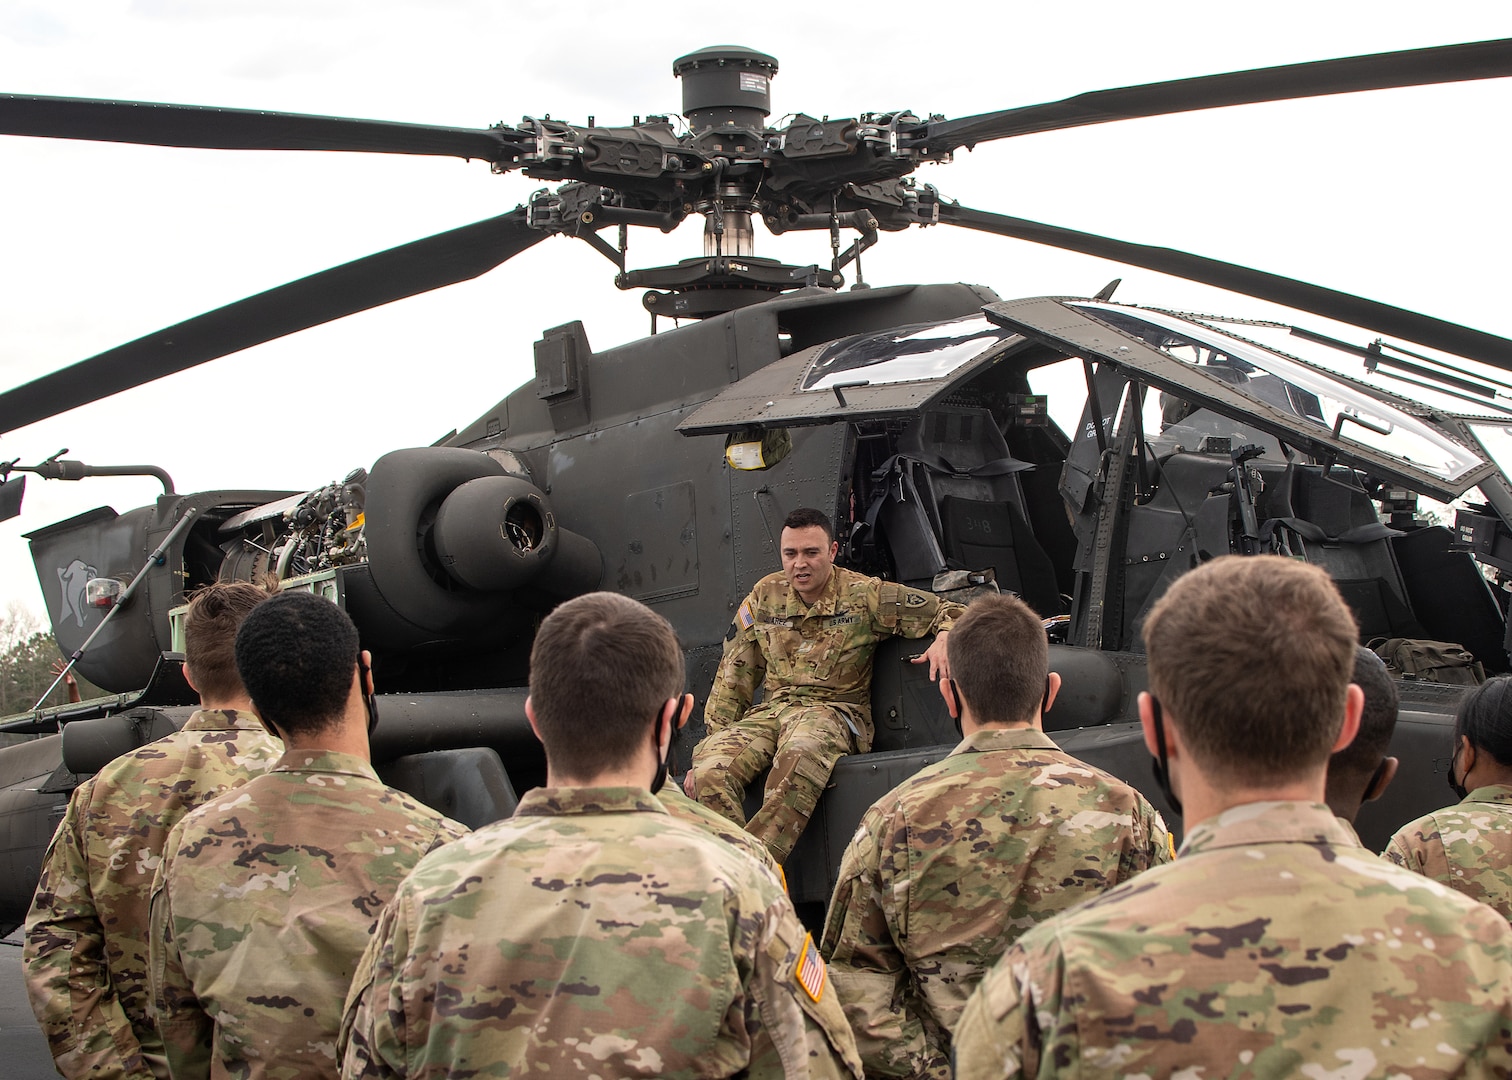 Maj. Eric Juarez, a helicopter pilot with the 449th Combat Aviation Brigade, North Carolina Army National Guard, speaks with ROTC cadets from East Carolina University during an ROTC training event in Greenville, North Carolina. Army National Guard members interested in commissioning through ROTC may also qualify for the Army National Guard ROTC Minuteman Scholarship, a program administered through the U.S. Army Cadet Command that pays full tuition and other education expenses for Army Guard members enrolled in an Army ROTC program.